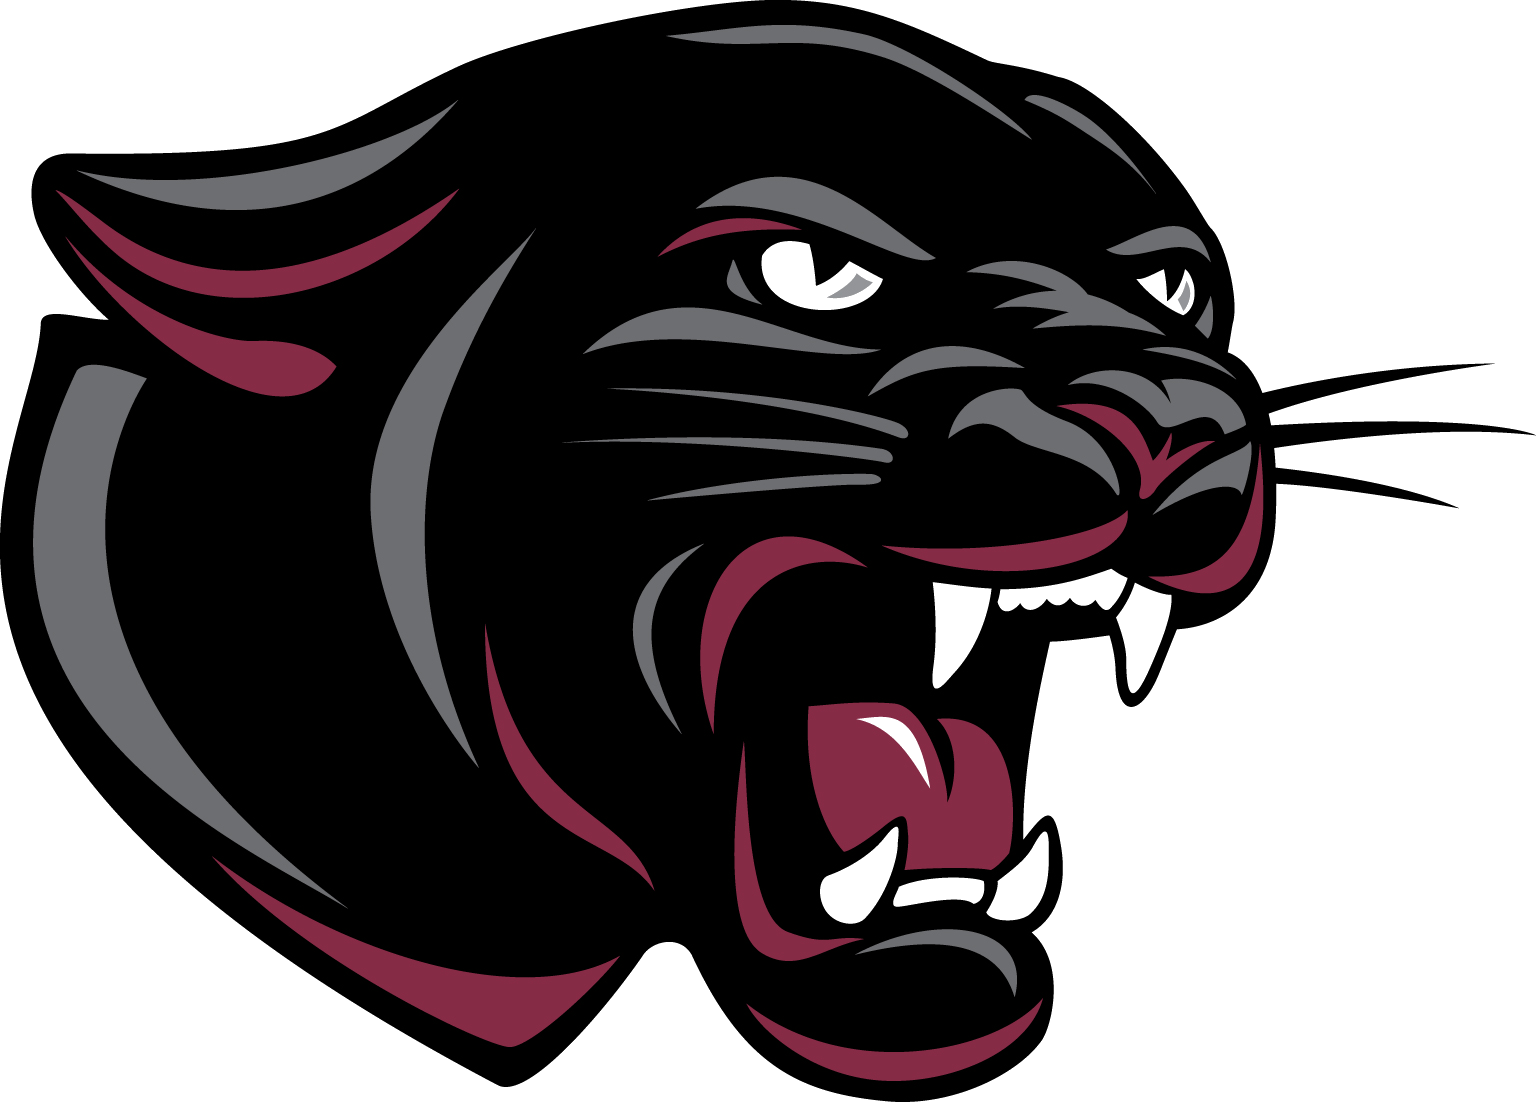 School Permian Panther Cat High Logo Mascot PNG Image